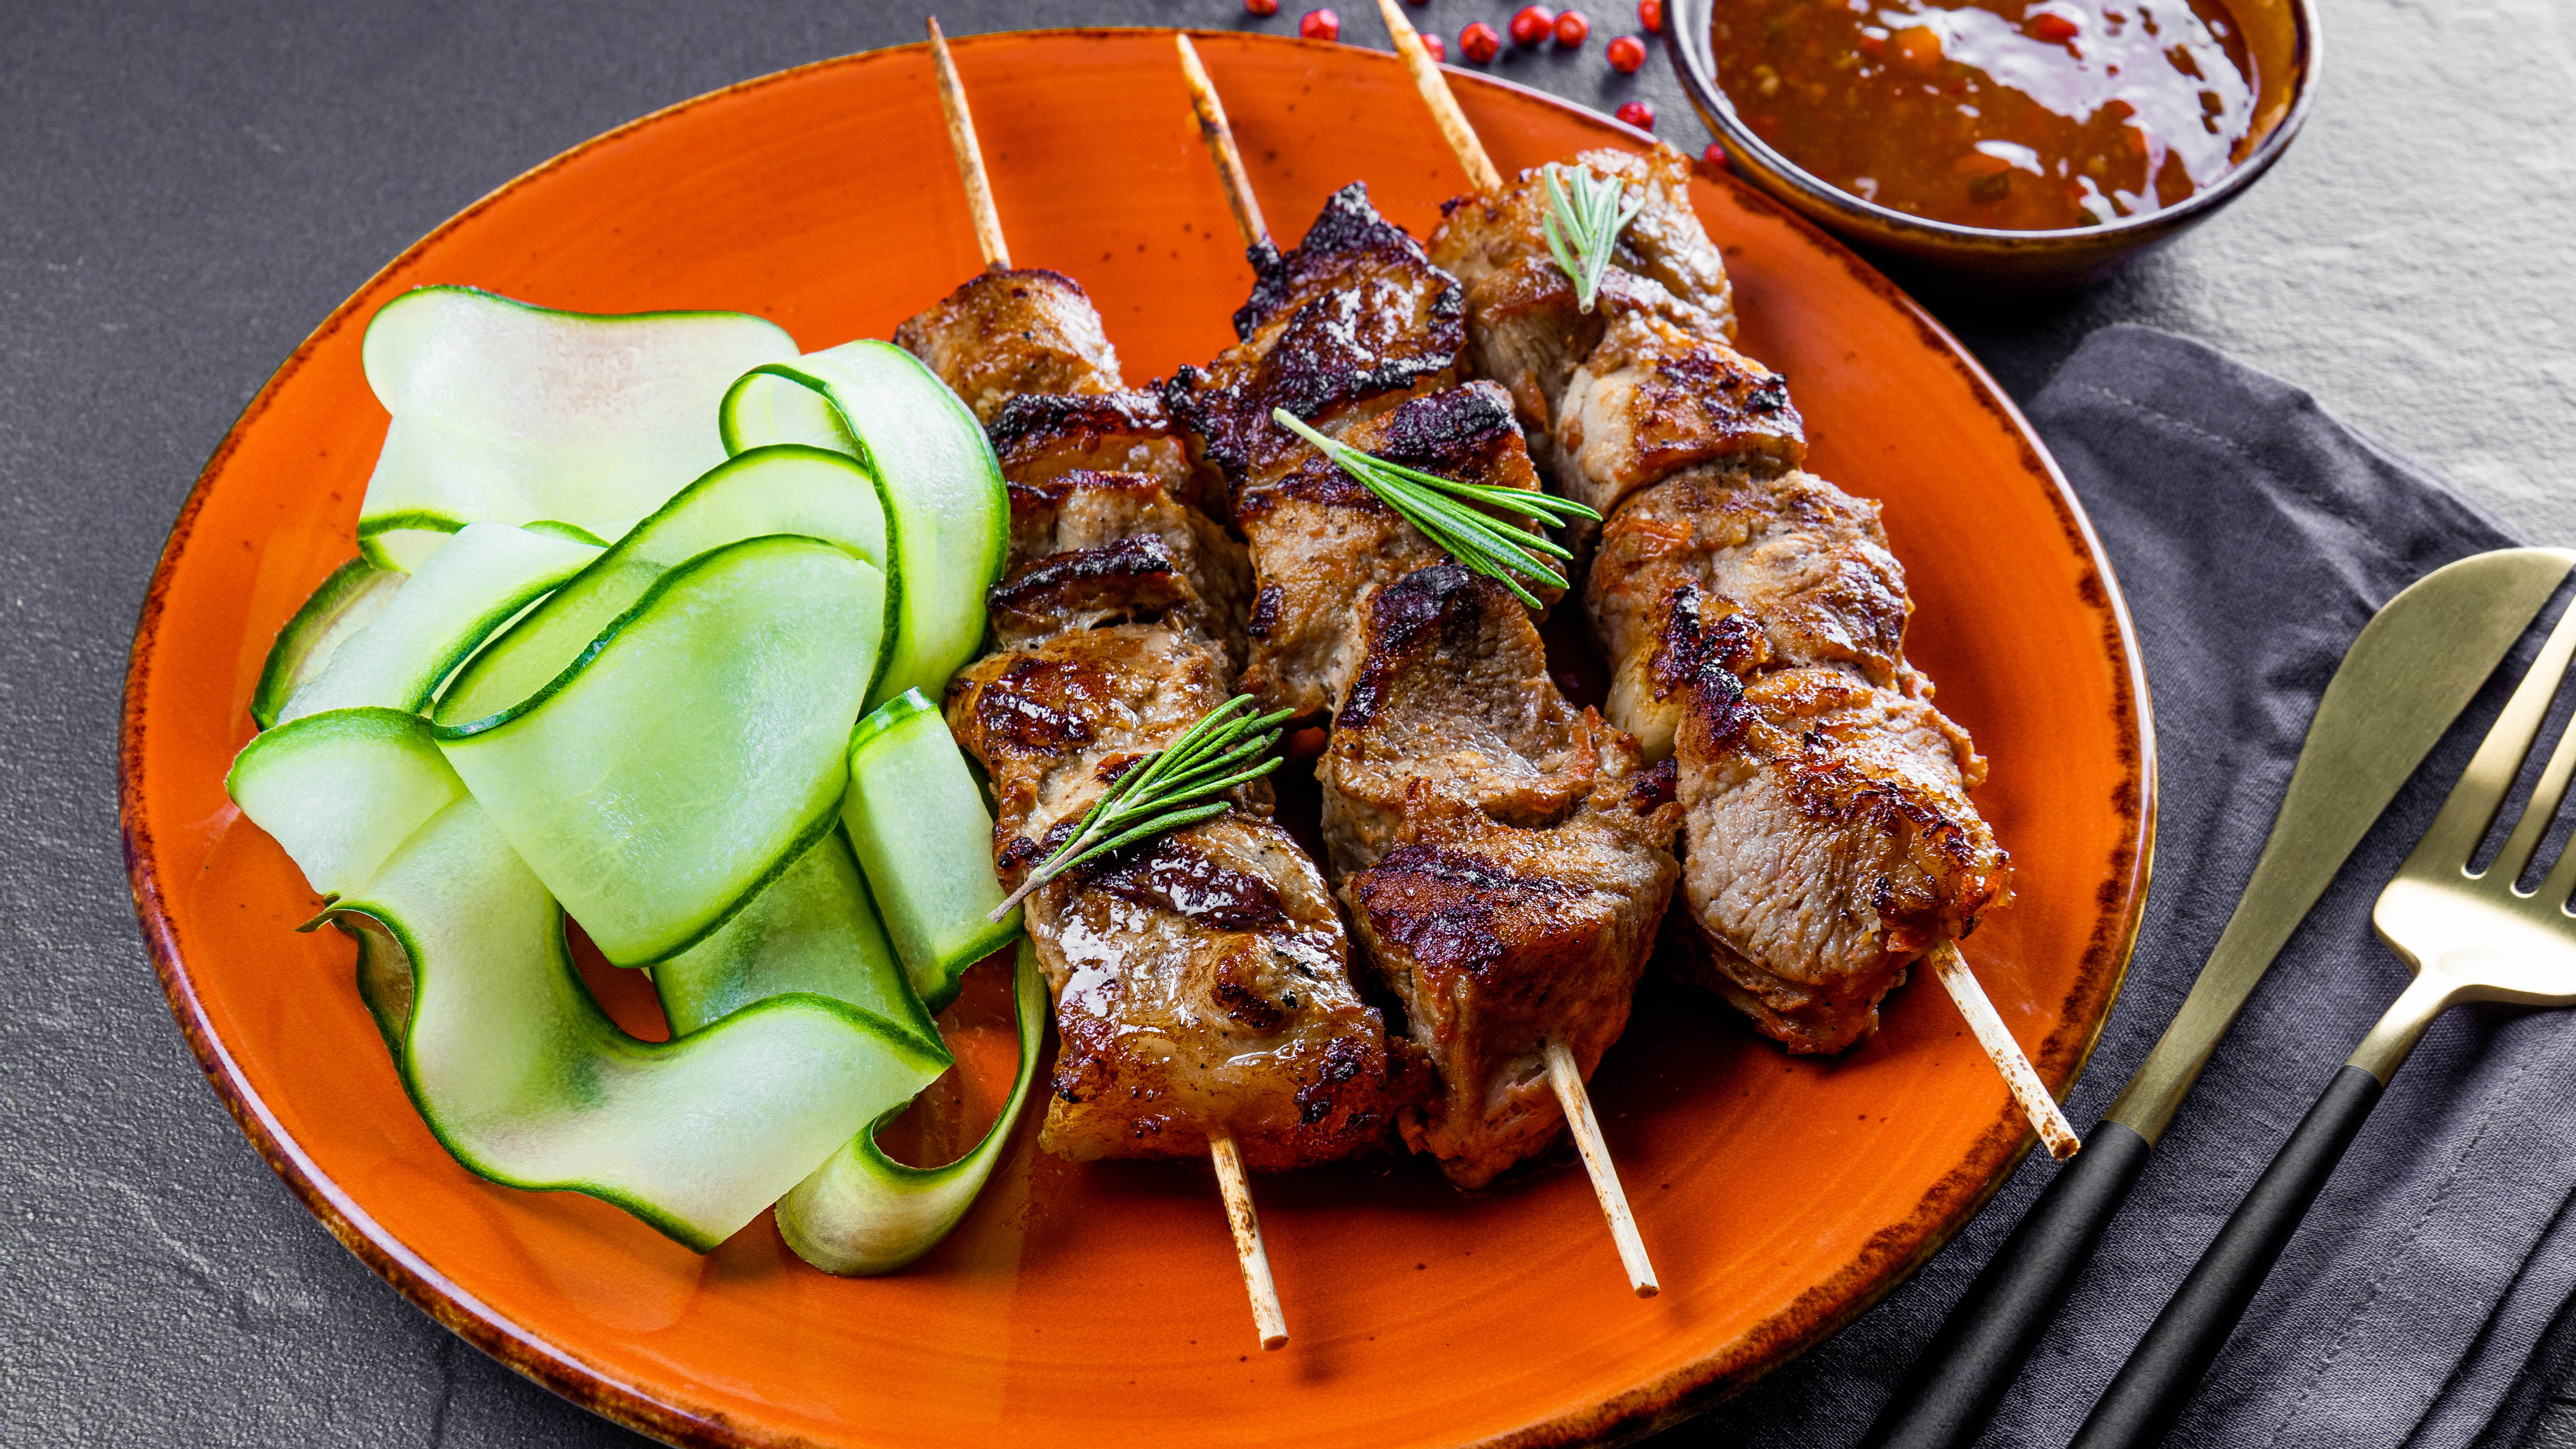 Grilled meat on skewers in a plate with salad